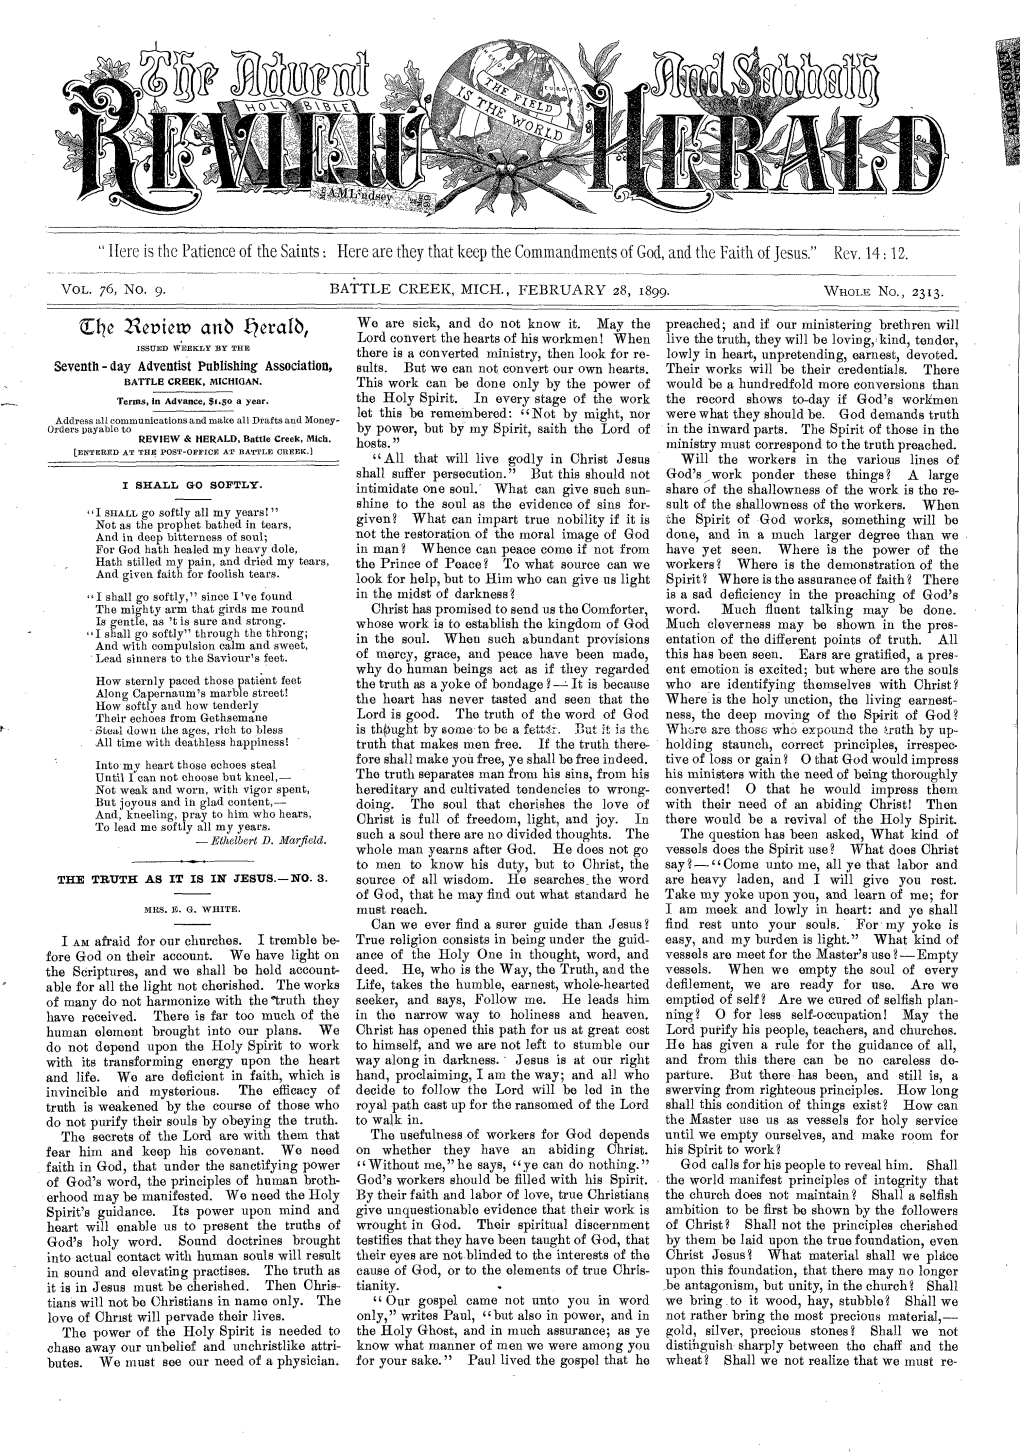 Review and Herald for 1899